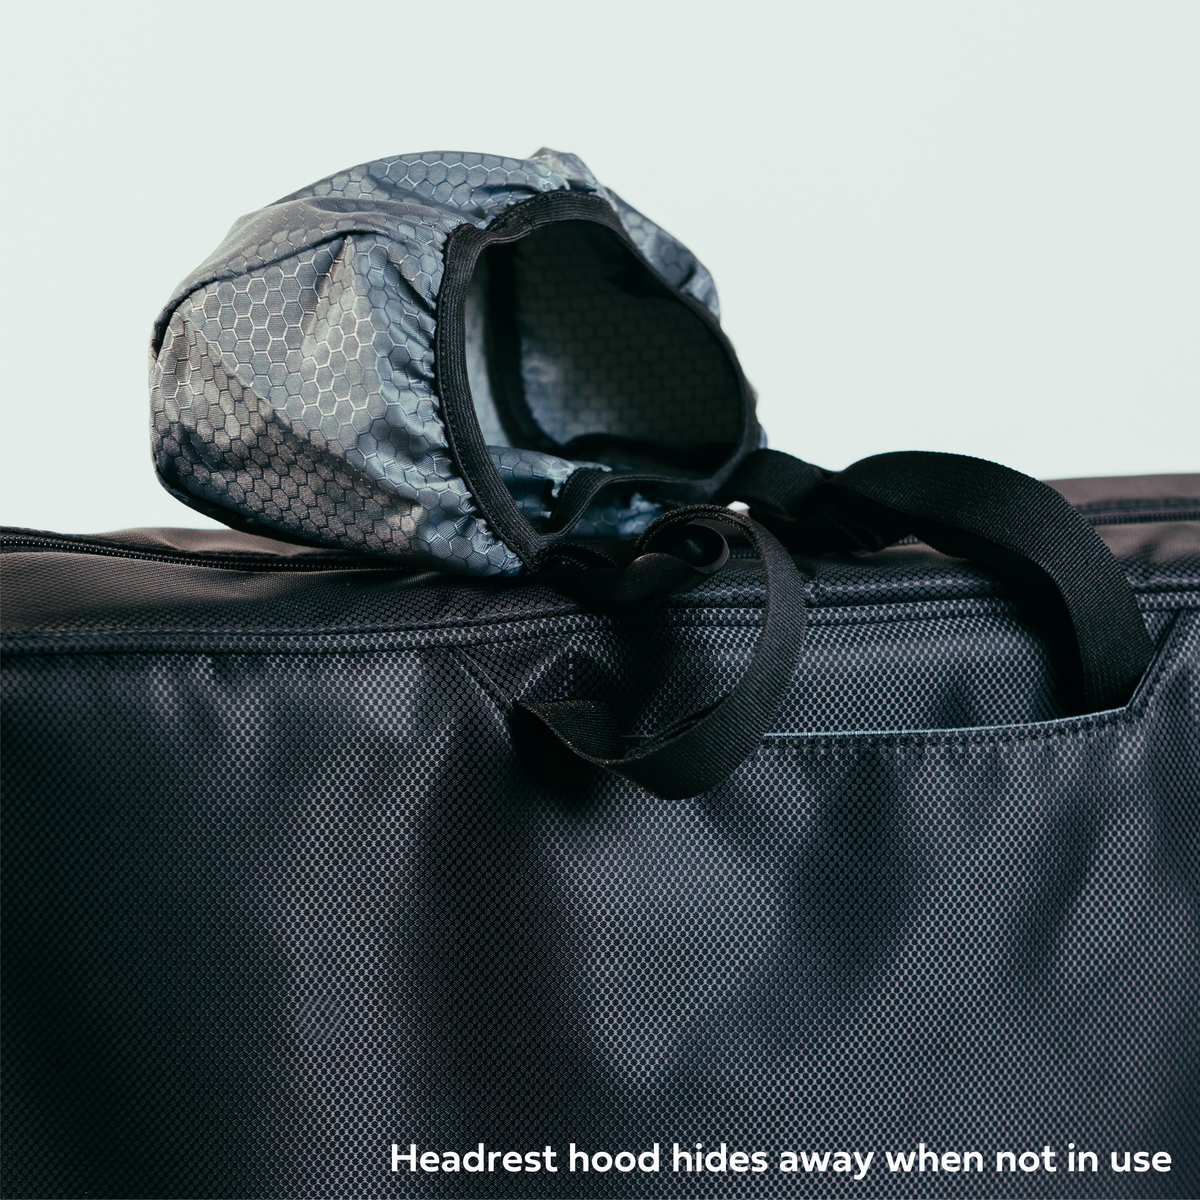 Close up view of Parc’s innovative car headrest hood sticking out of its dedicated pocket with velcro closure. Headrest hood is grey ripstop material with black webbing adjustable straps. Text on photo says headrest hood hides away when not in use.